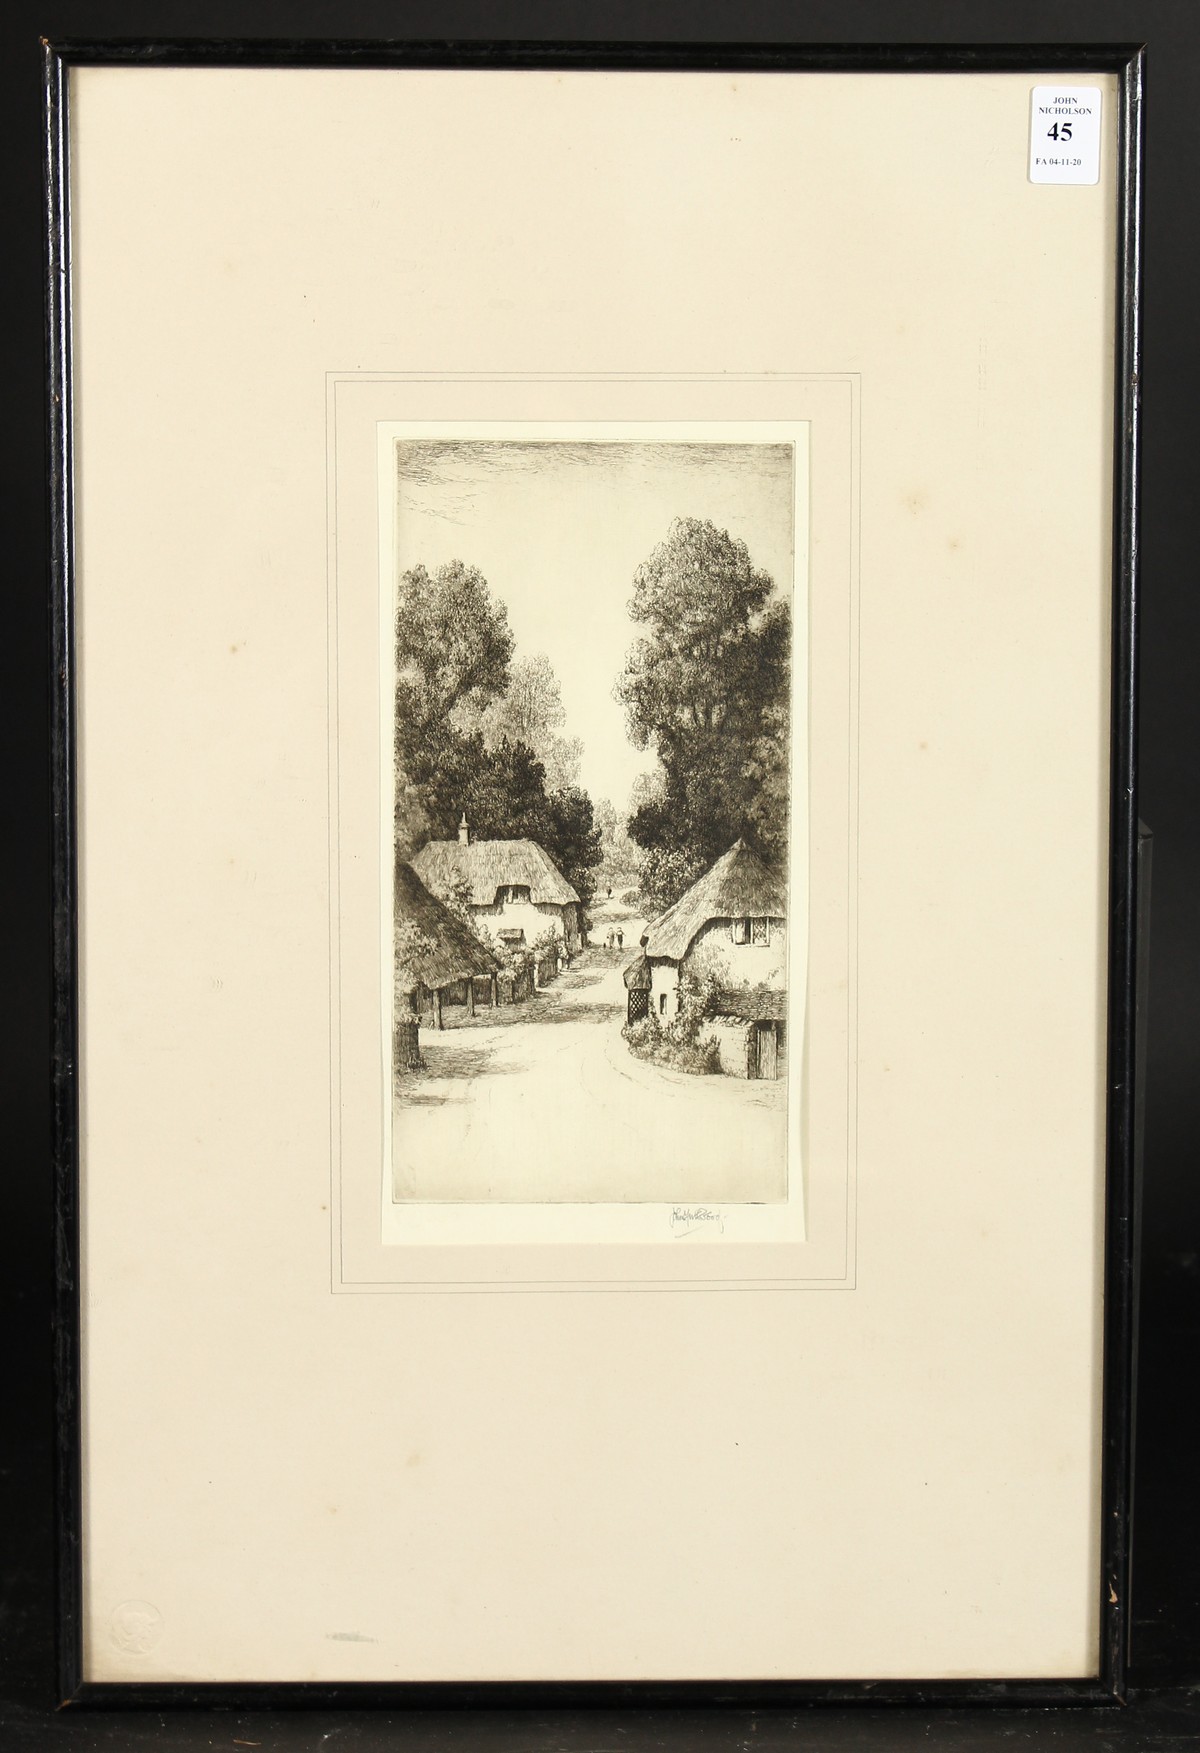 John Fullwood (1854-1931) British, figures on a village road, Etching, 10" x 5". - Image 2 of 7